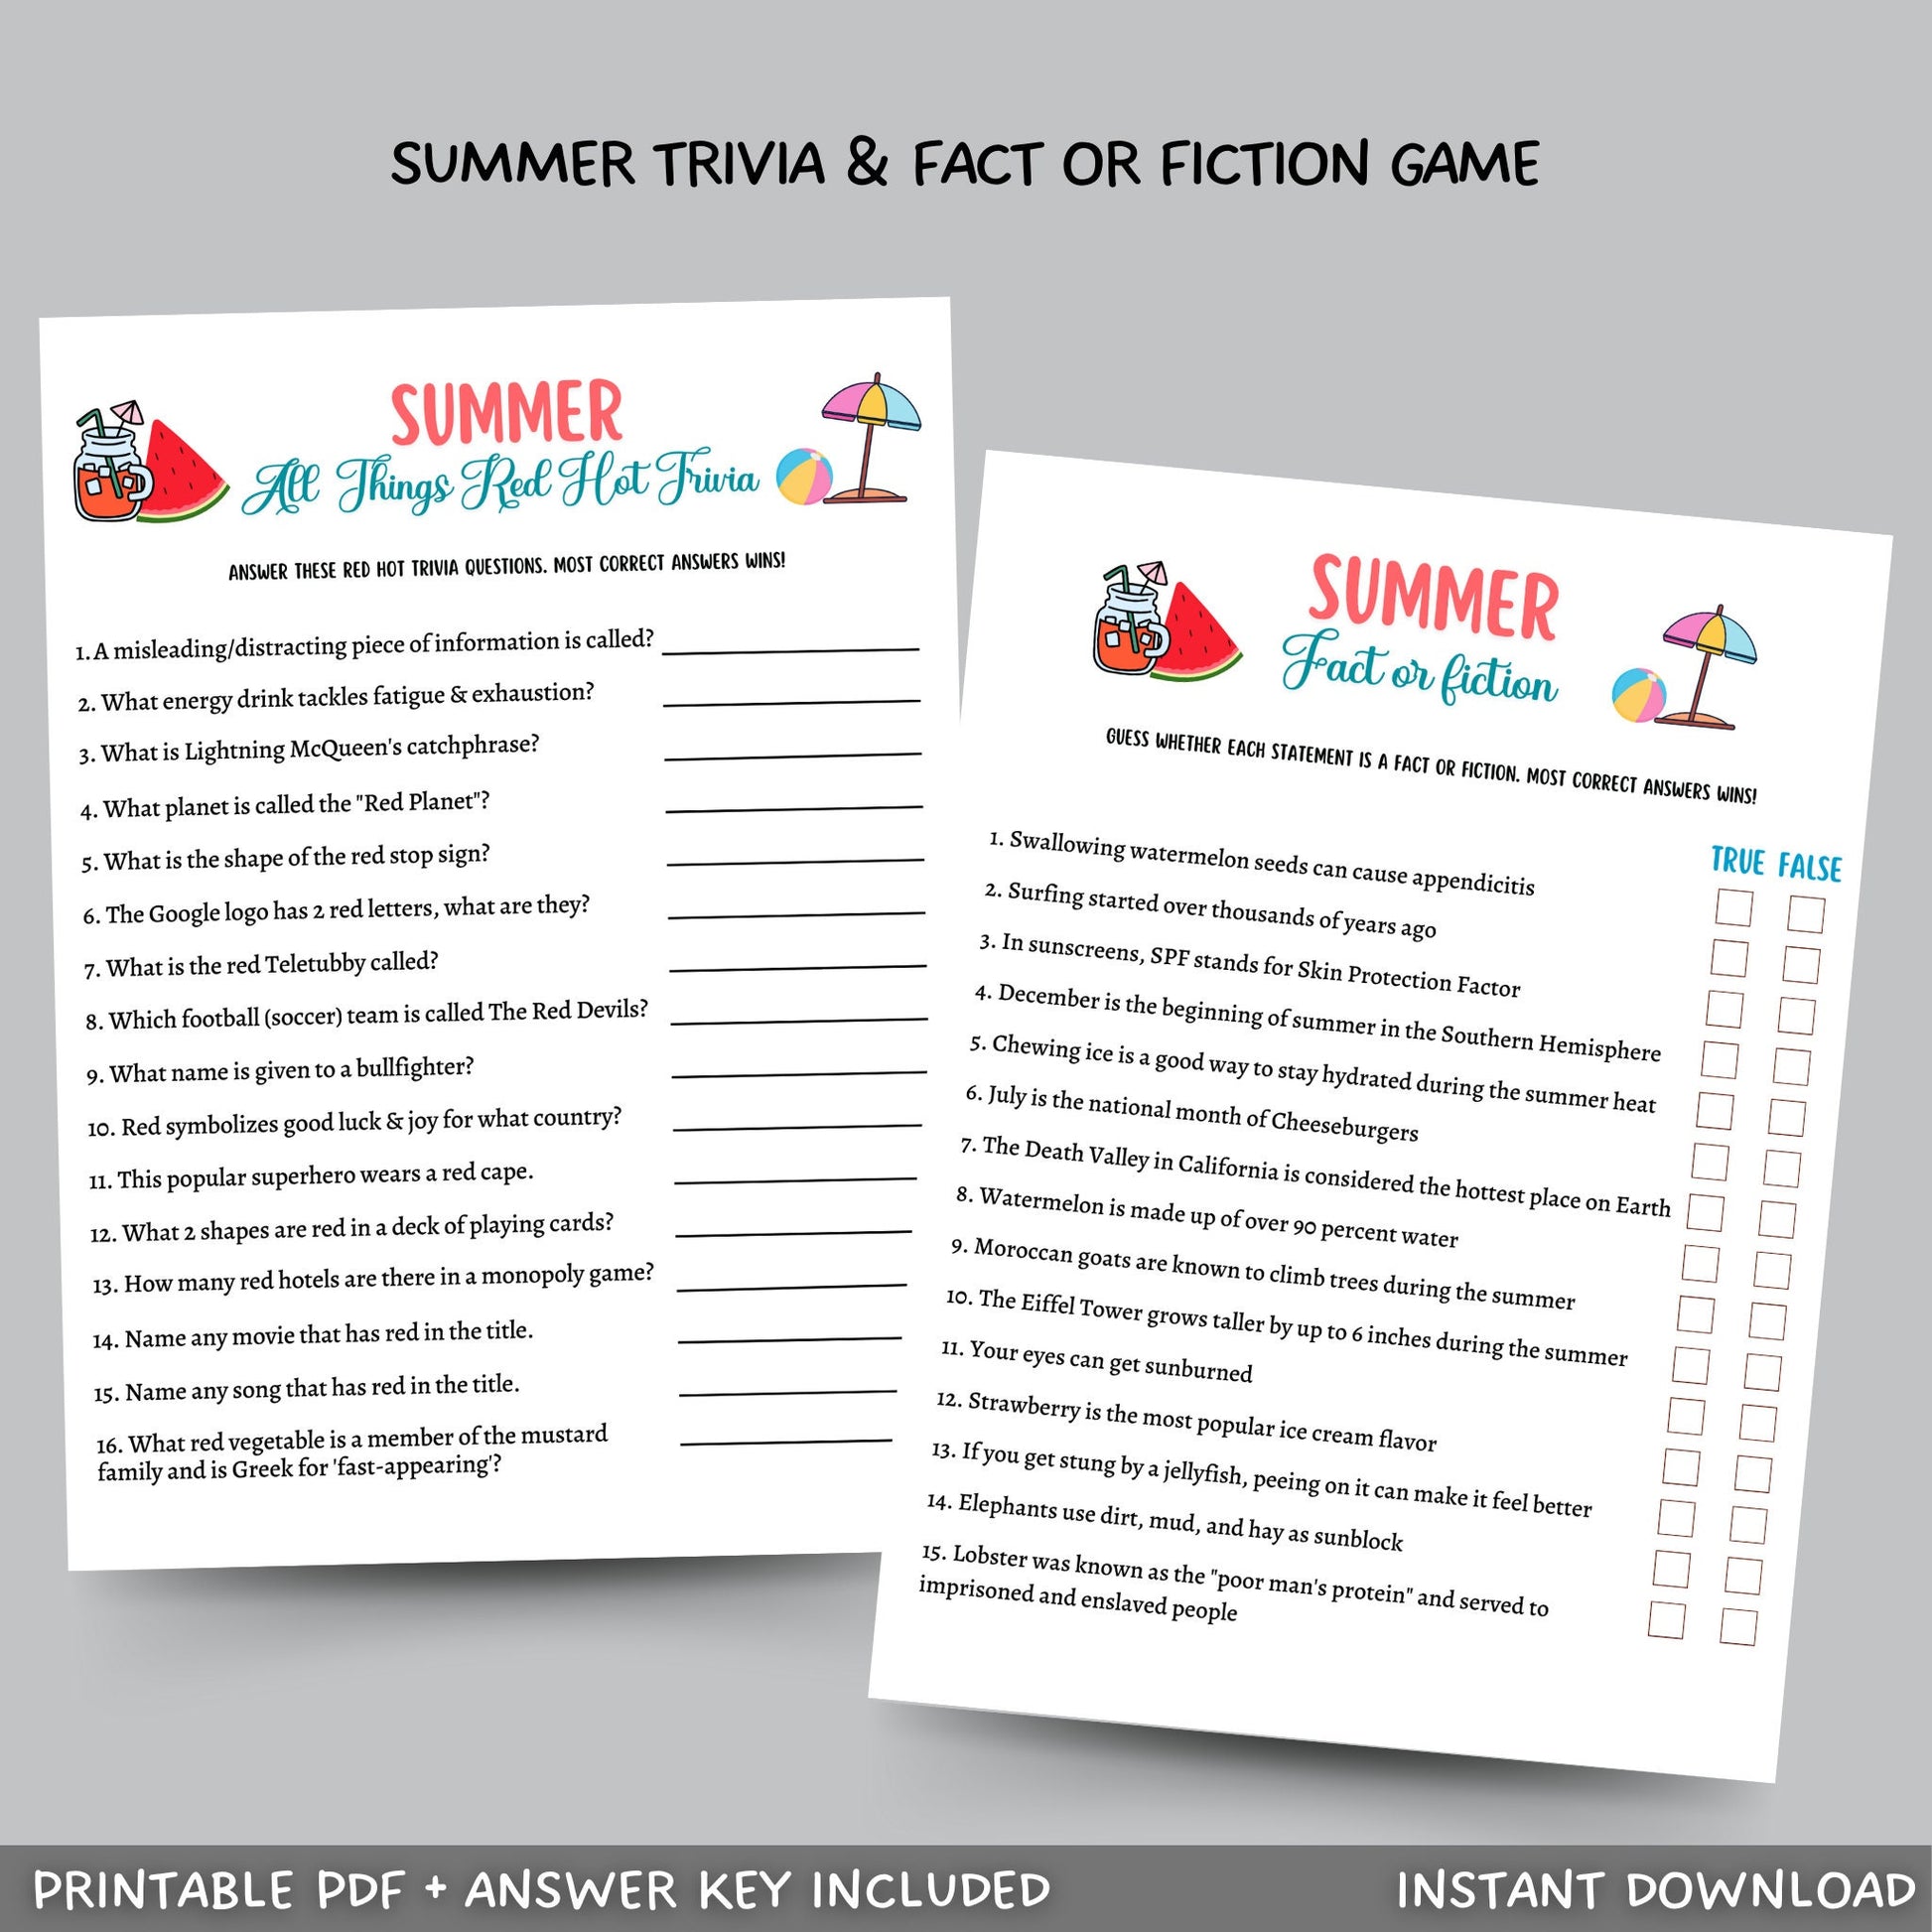 Summer Trivia Game Printable, Pool Party Games, Summer Camp Fact or Fiction Activity, Fun Beach Games for Kids, Summer Break Vacation Ideas